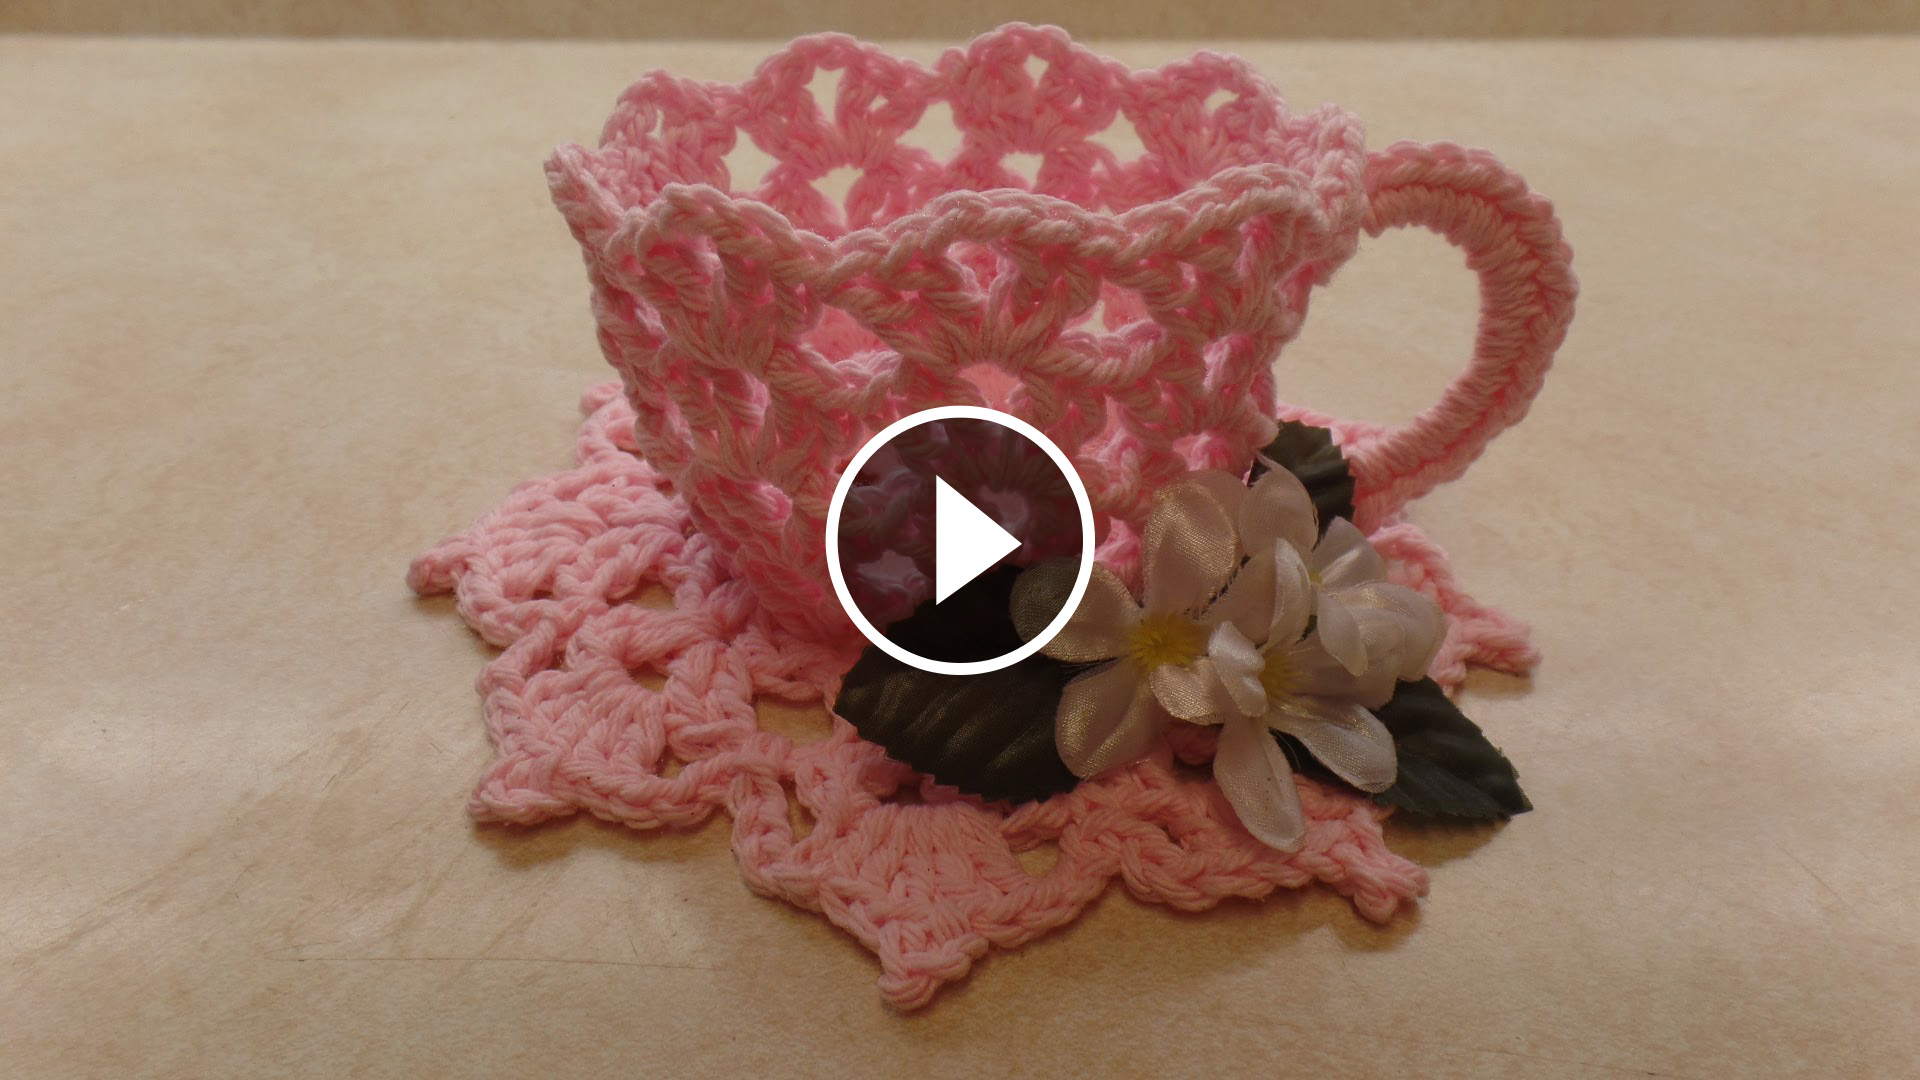 Teacup Crochet Decorations Featured Image